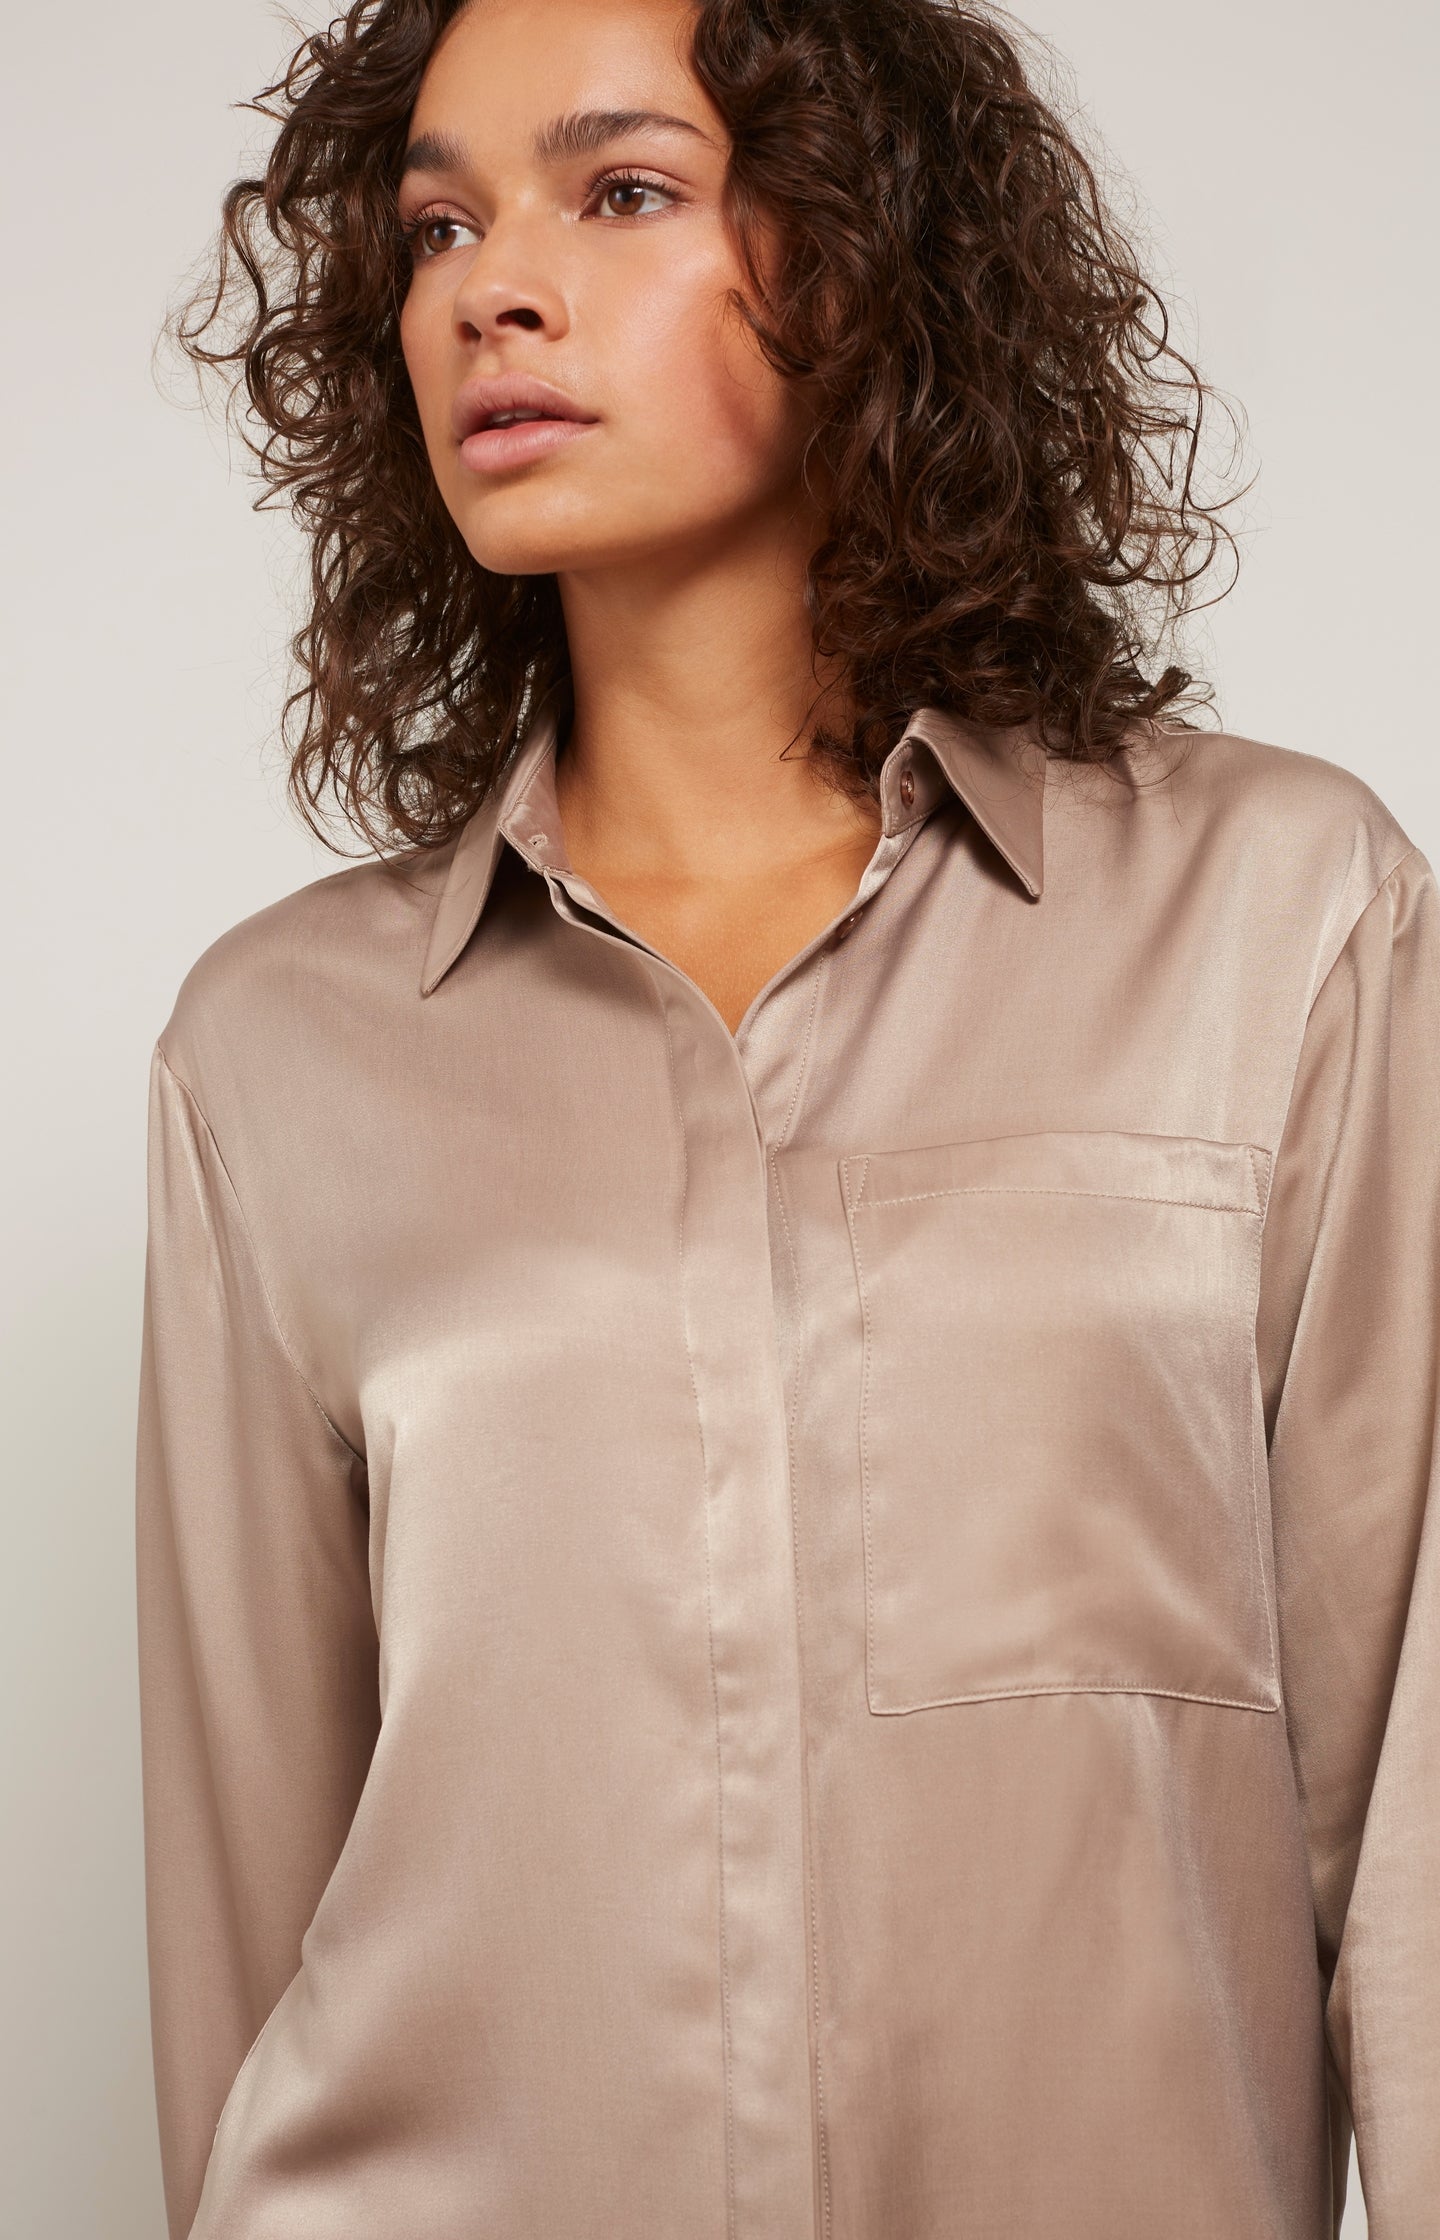 Satin blouse with long sleeves, pocket and button placket